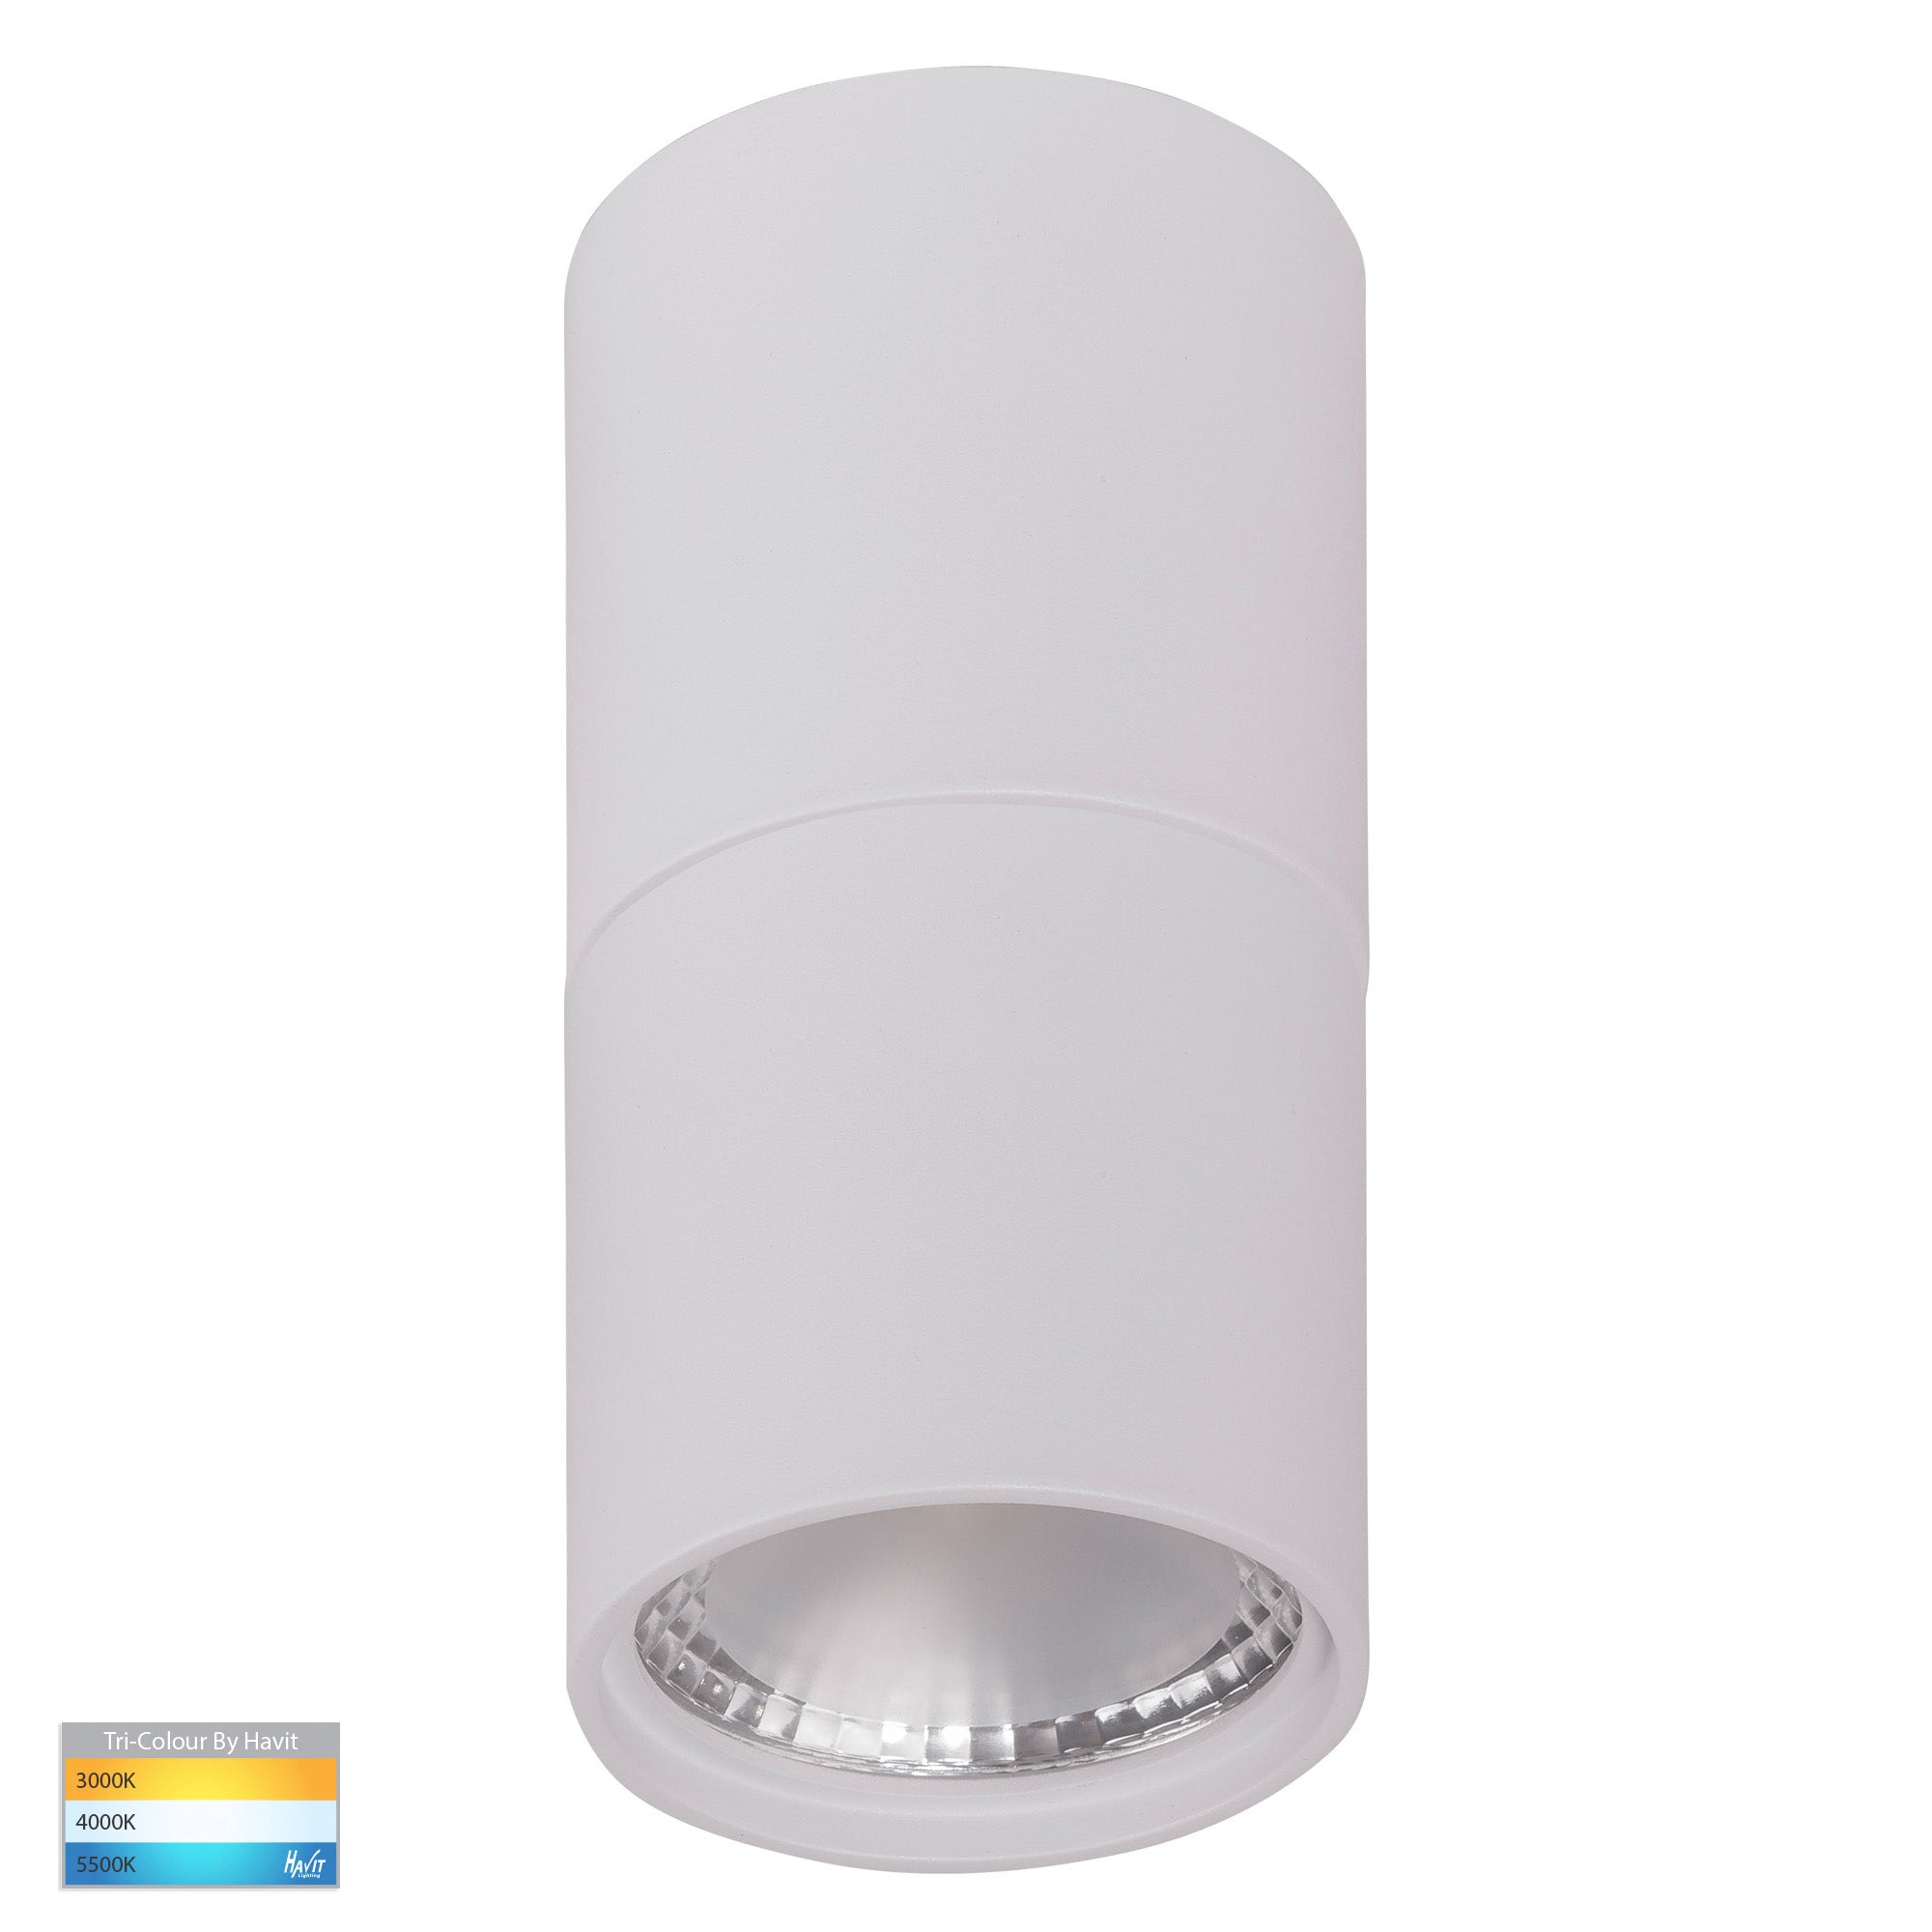 HV5802T-WHT-EXT | HV5802T-WHT-EXT-12V - Nella White 7w Surface Mounted LED Downlight with Extension